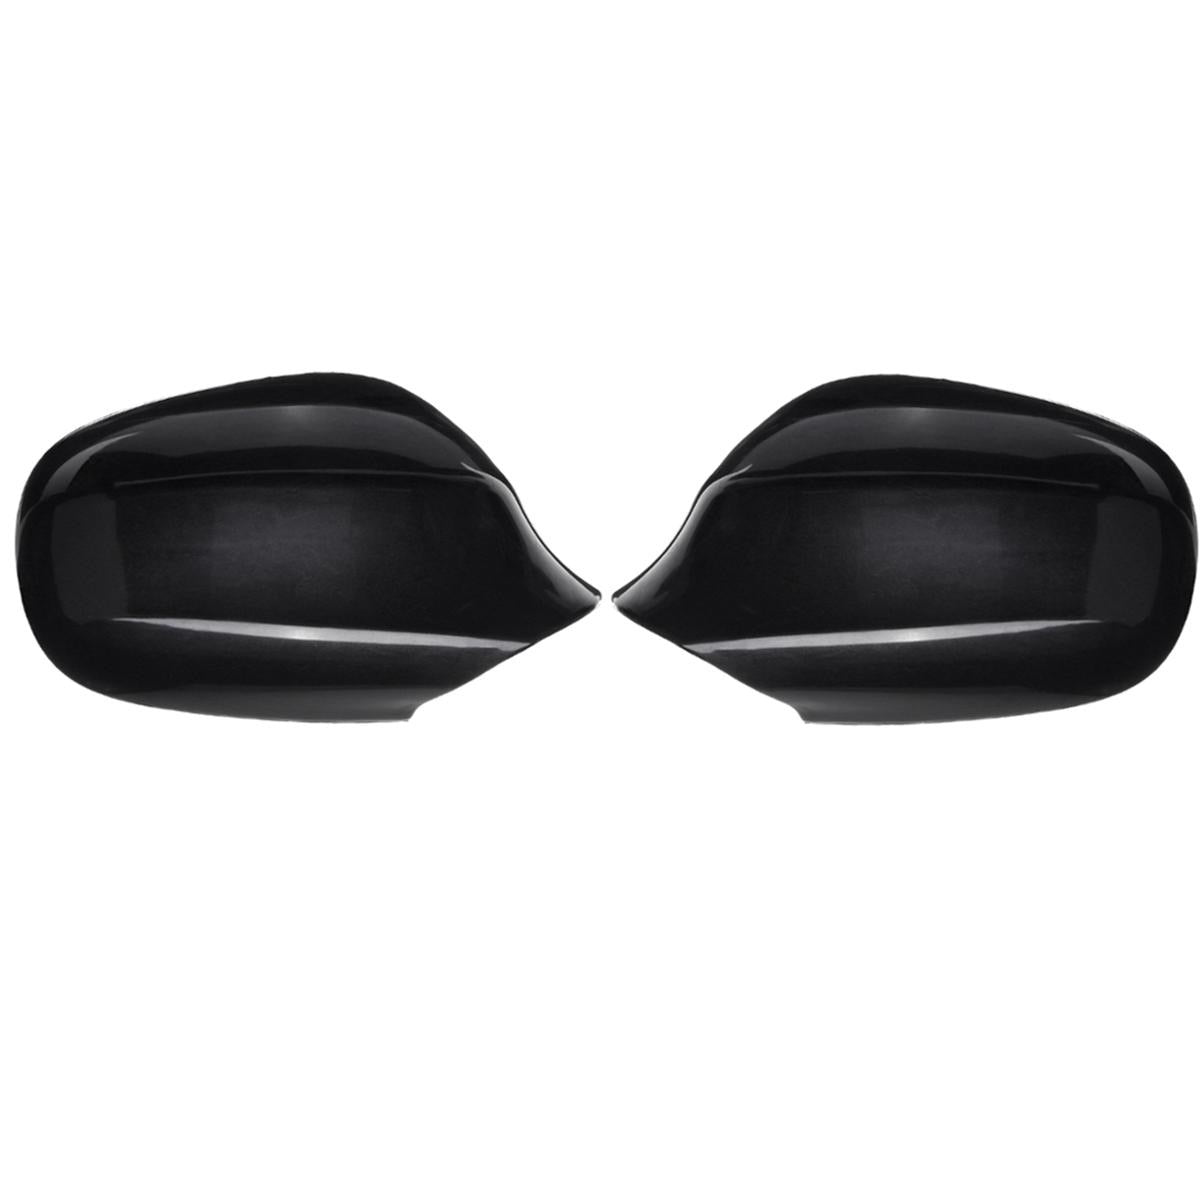 BMW E90 FACELIFT MIRROR COVERS